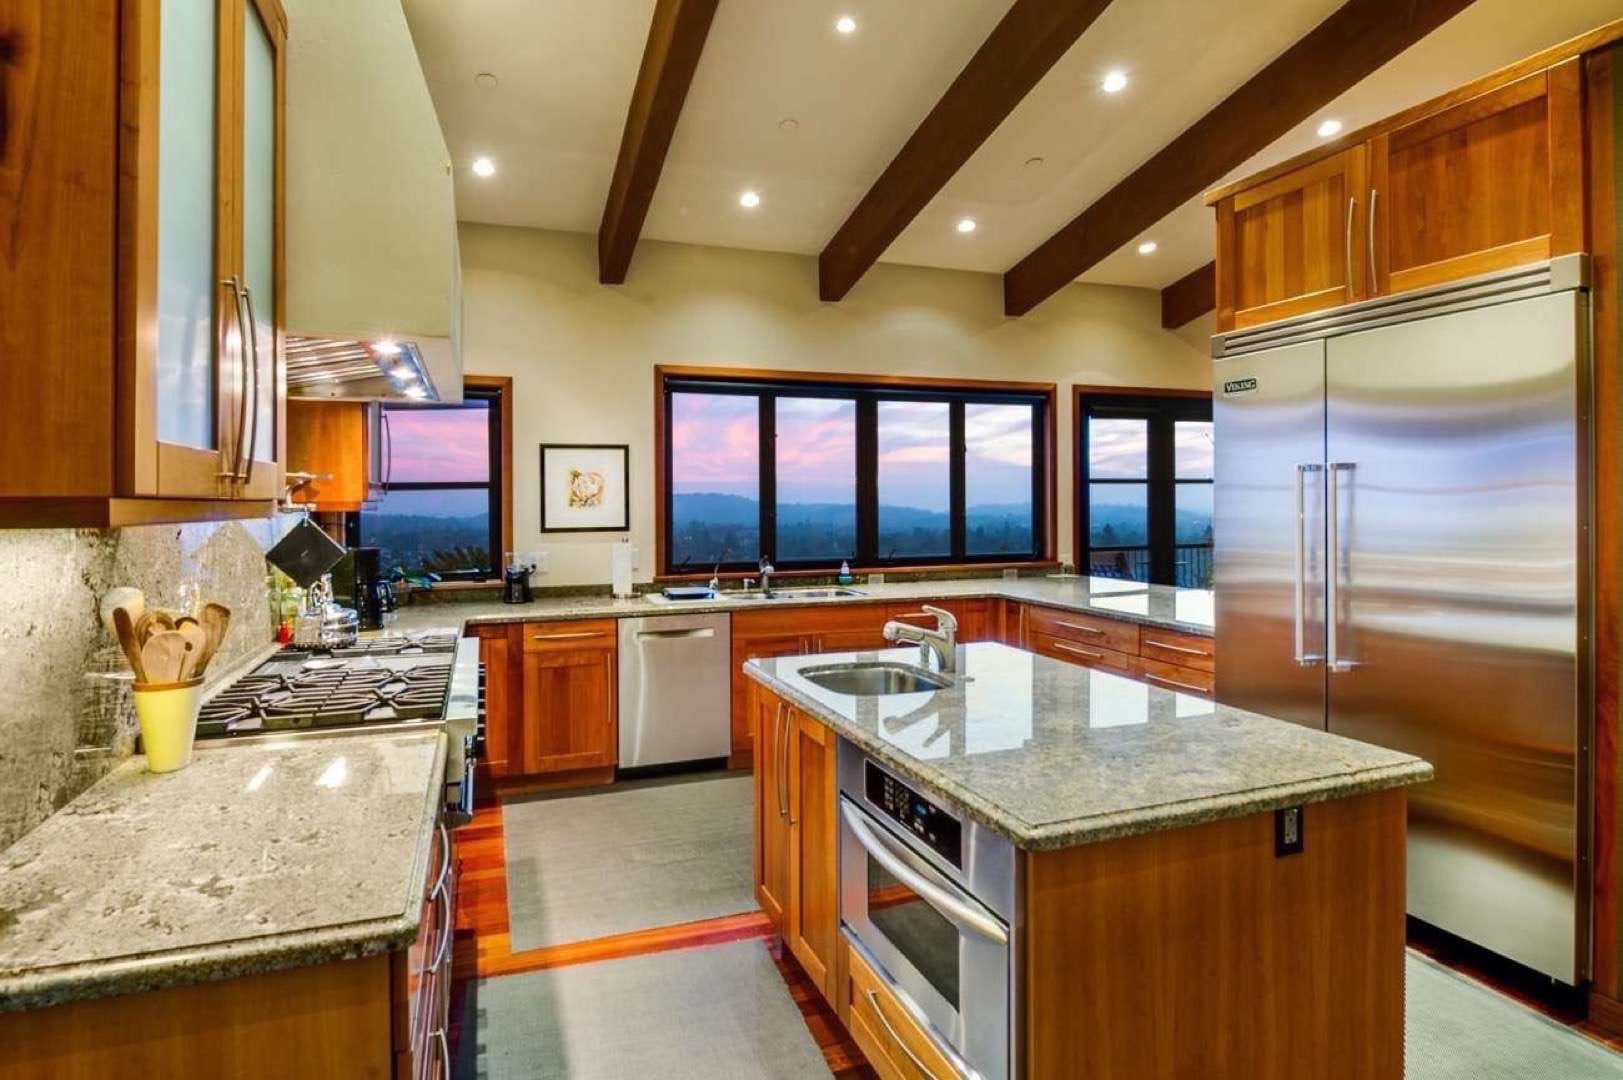 Truly Great Homes View of kitchen area of a house with granite countertops overlooking a valley. There is a large stainless steel refrigerator/freezer.